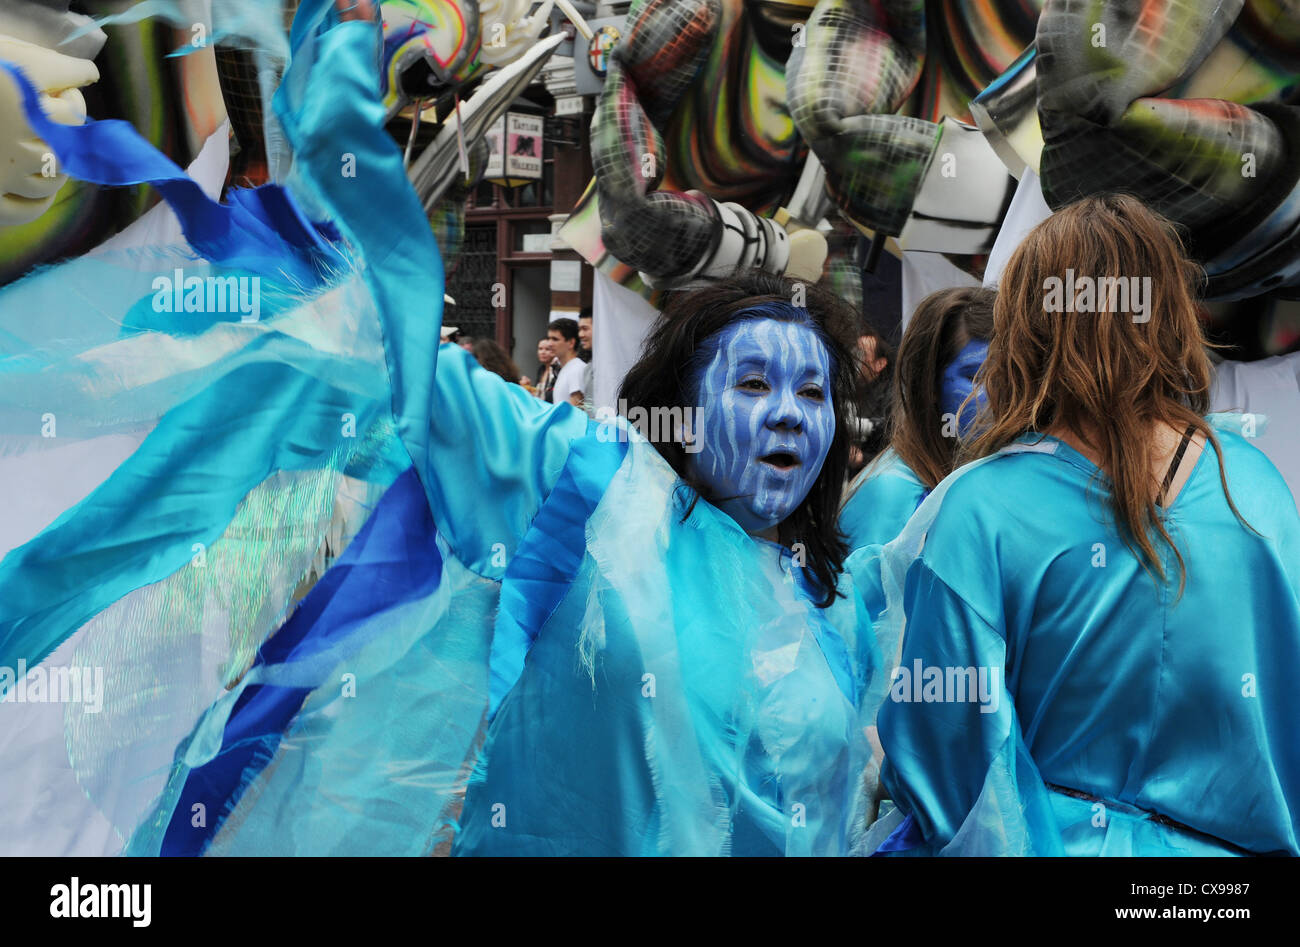 Performers and Carnival goers at Notting Hill Carnival on Monday 27th August 2012. Stock Photo